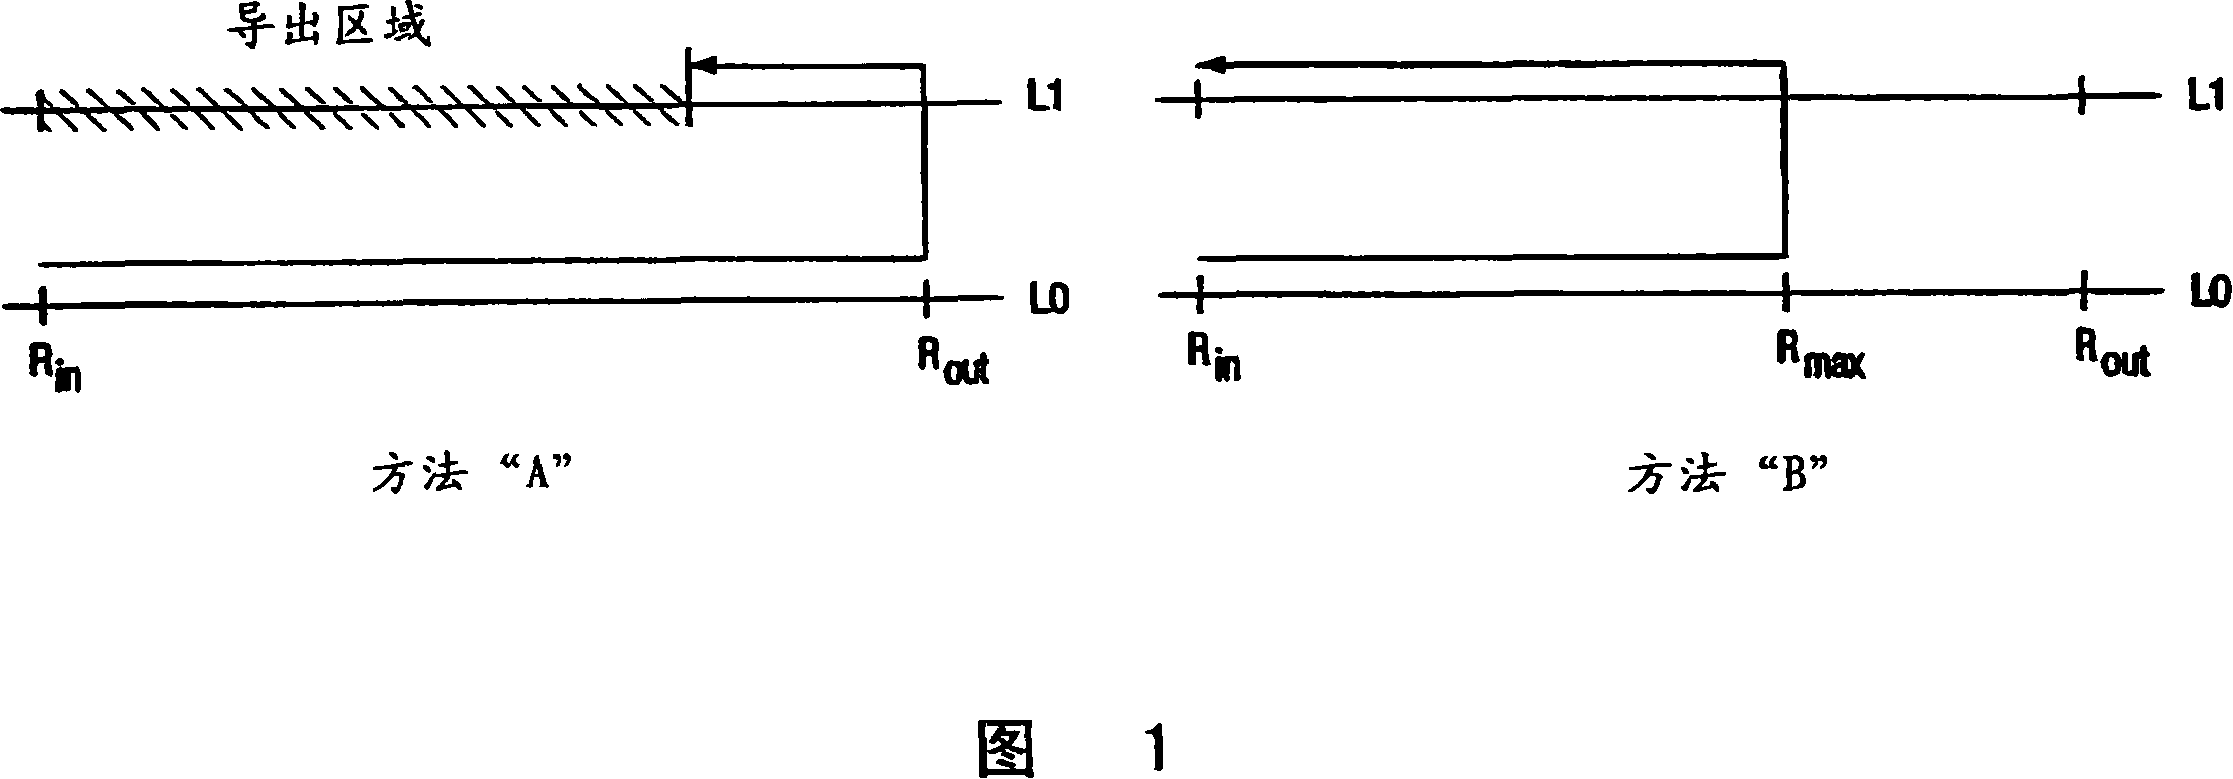 Recording methods and devices for recording information on dual layer recordable disks